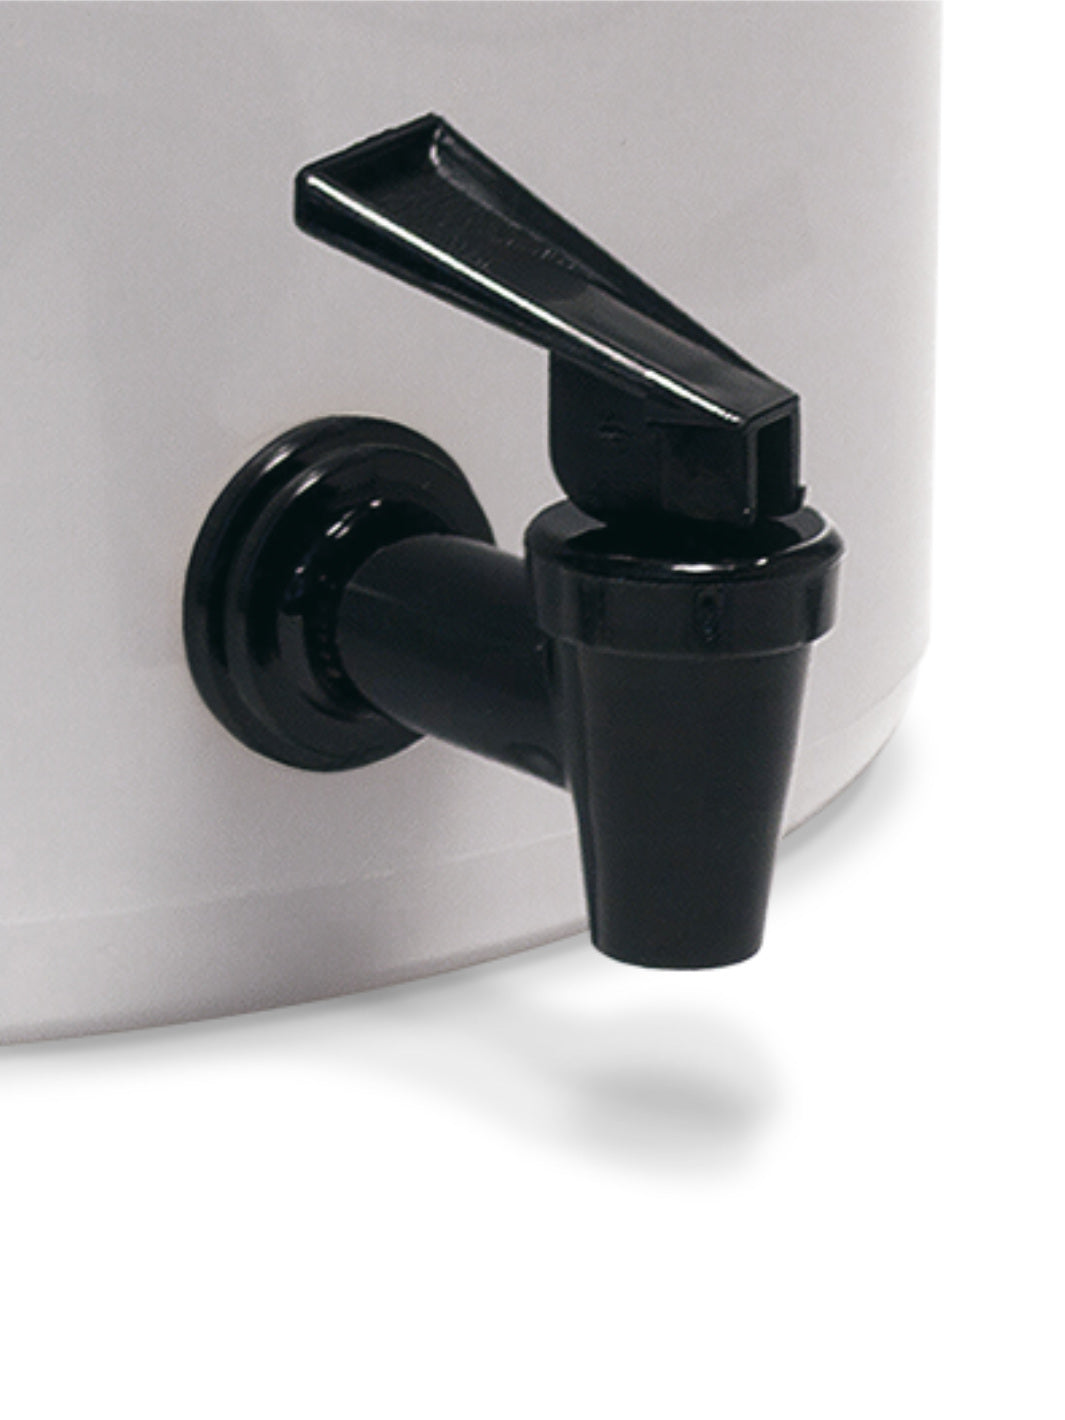 TODDY Commercial Model Replacement Spigot